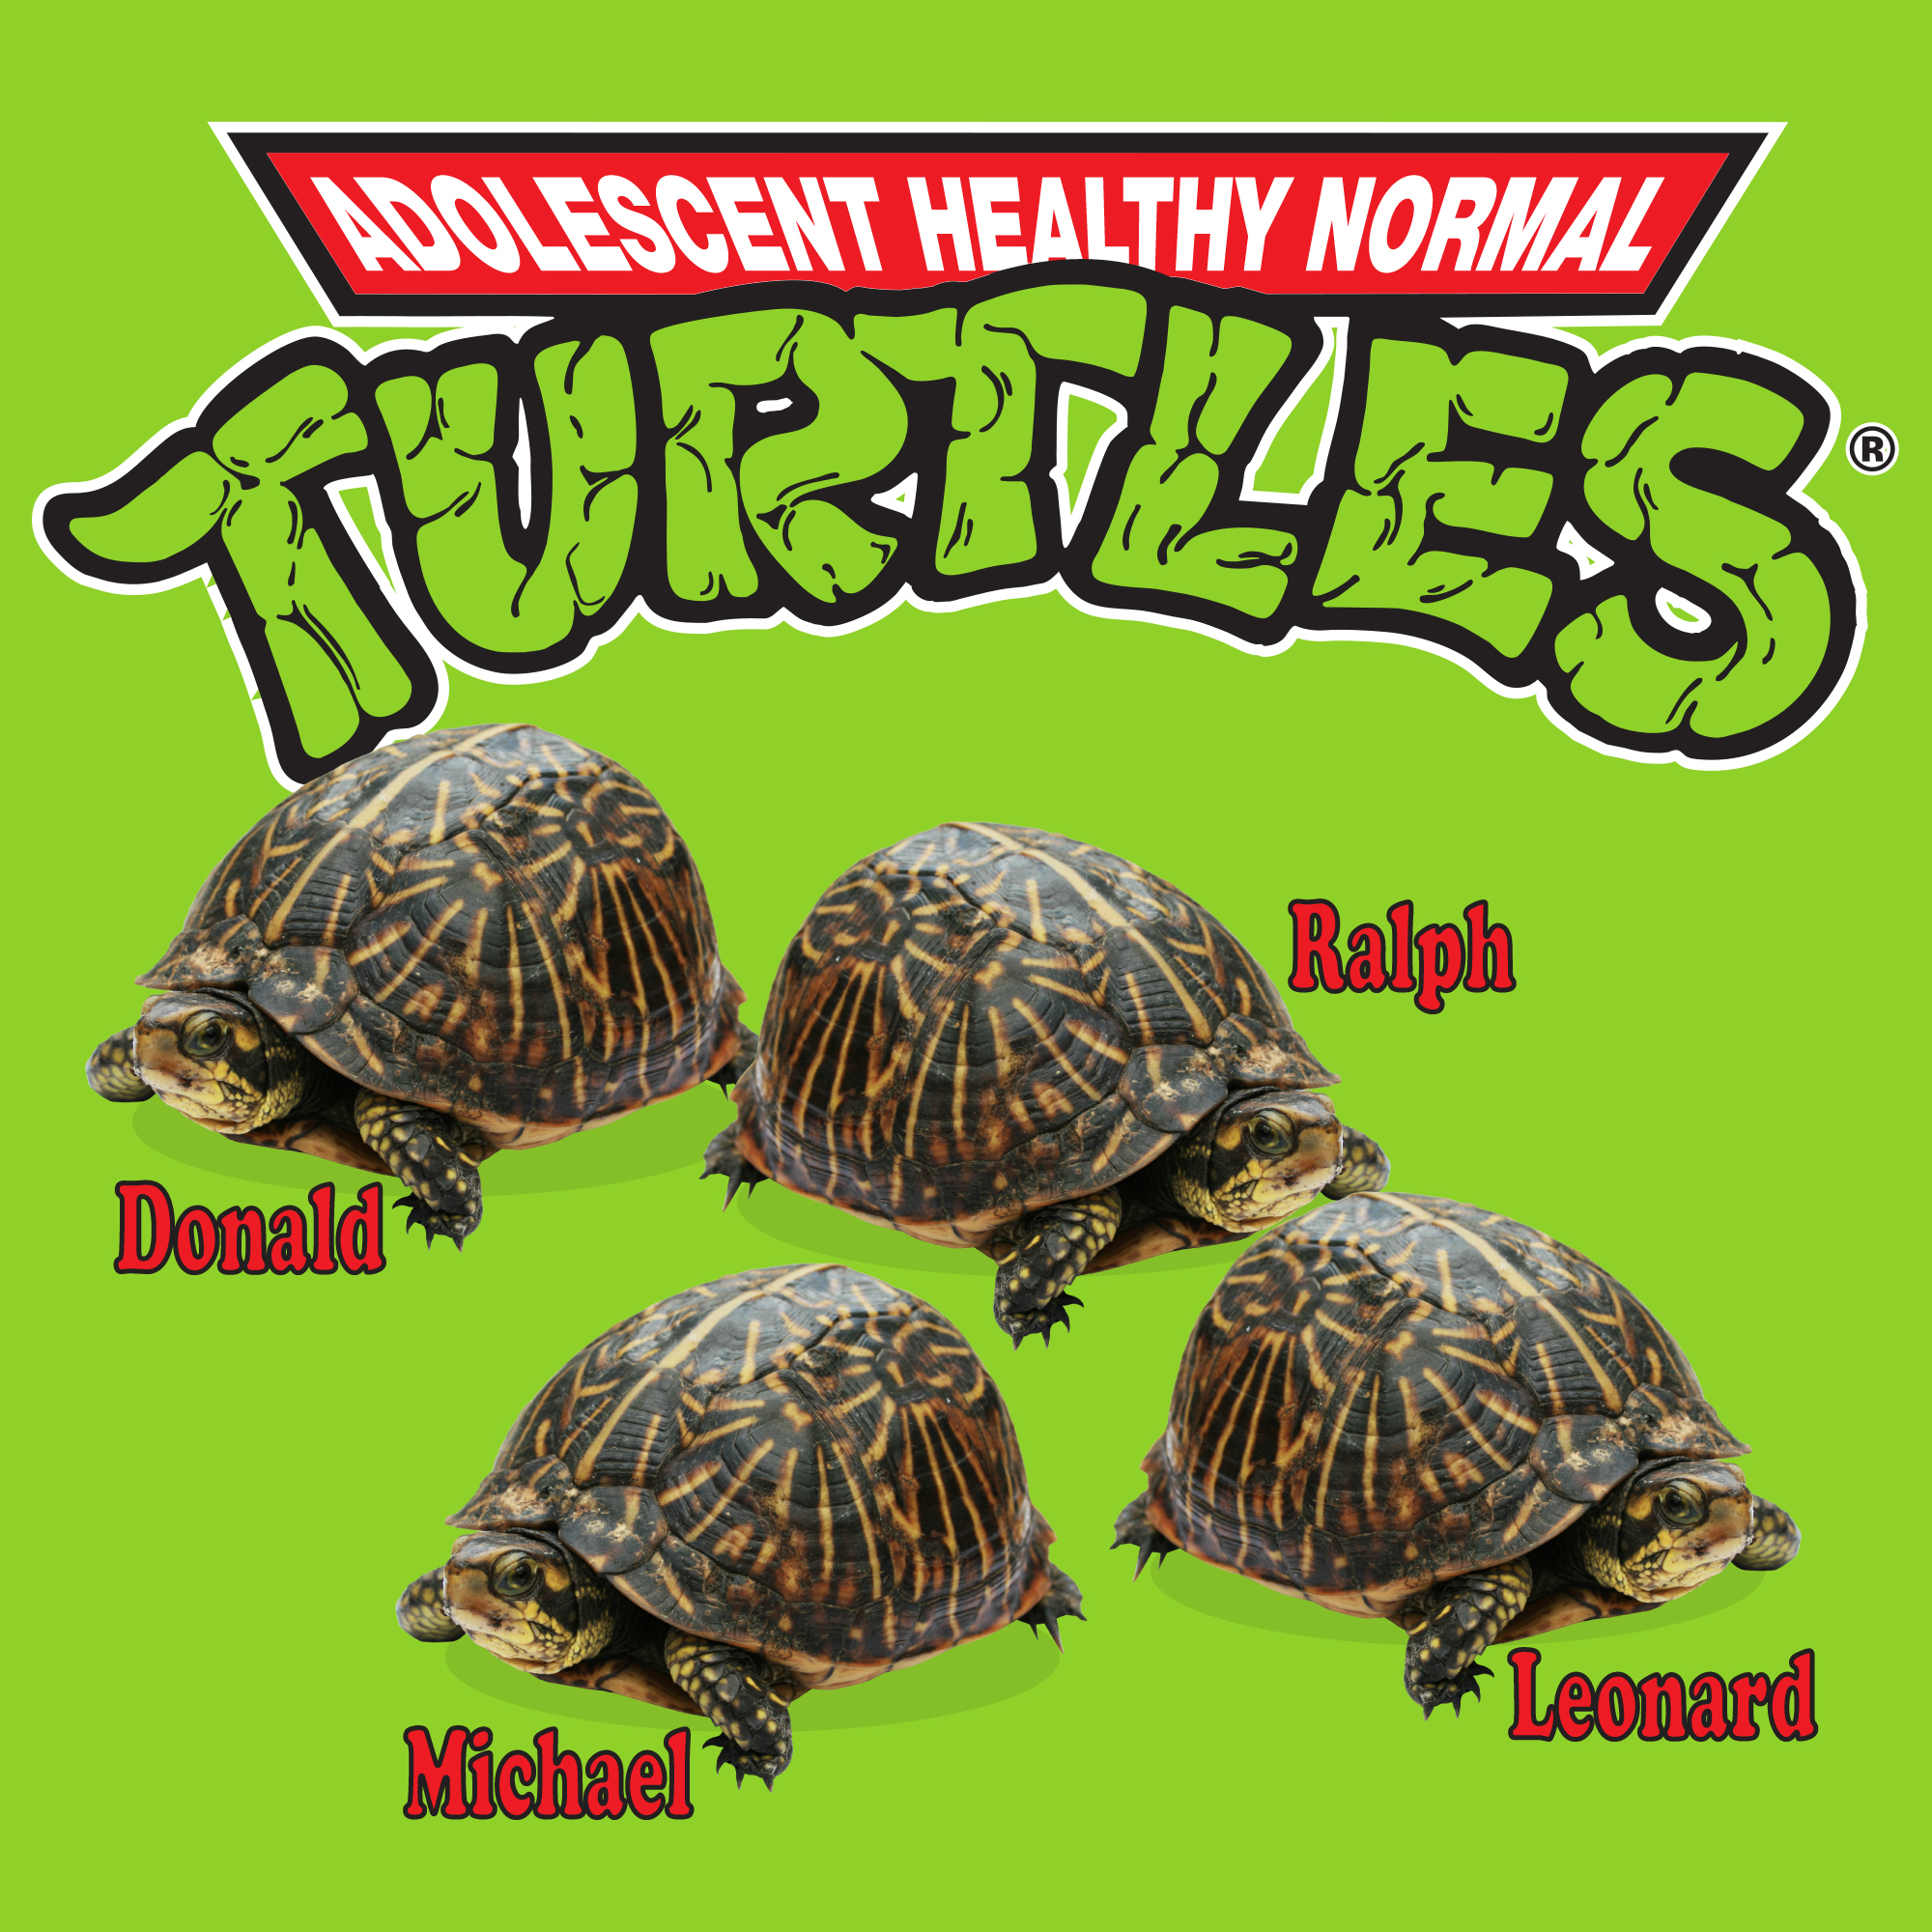 Adolescent healthy and normal turtles.